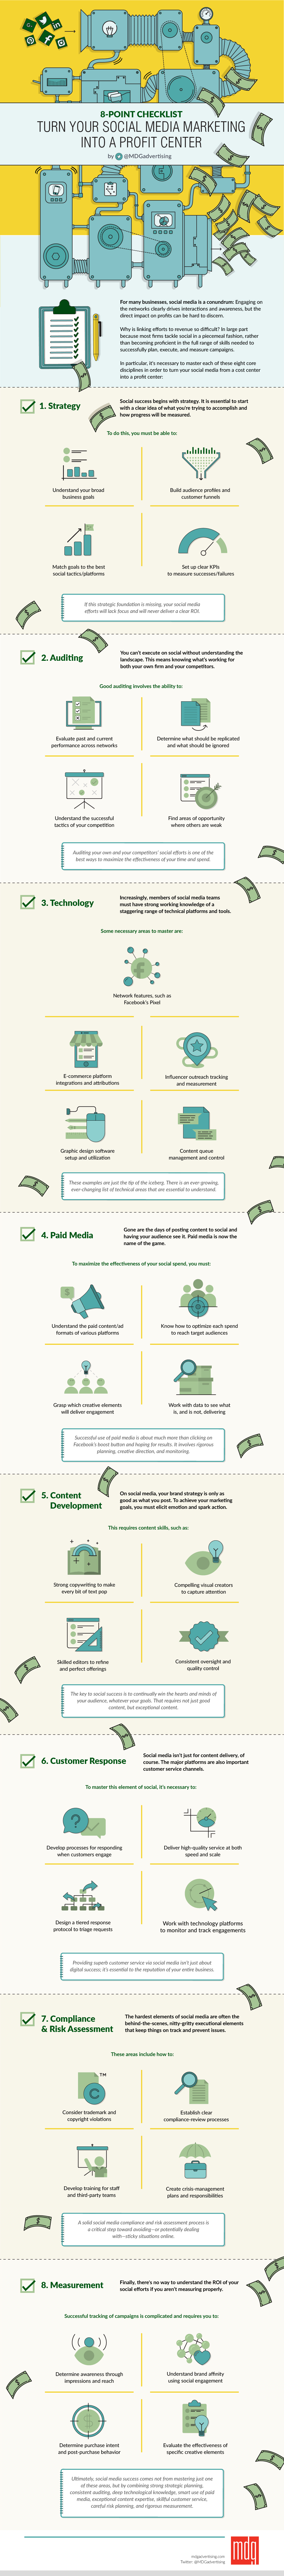 Make Money With Social Media Marketing Infographic